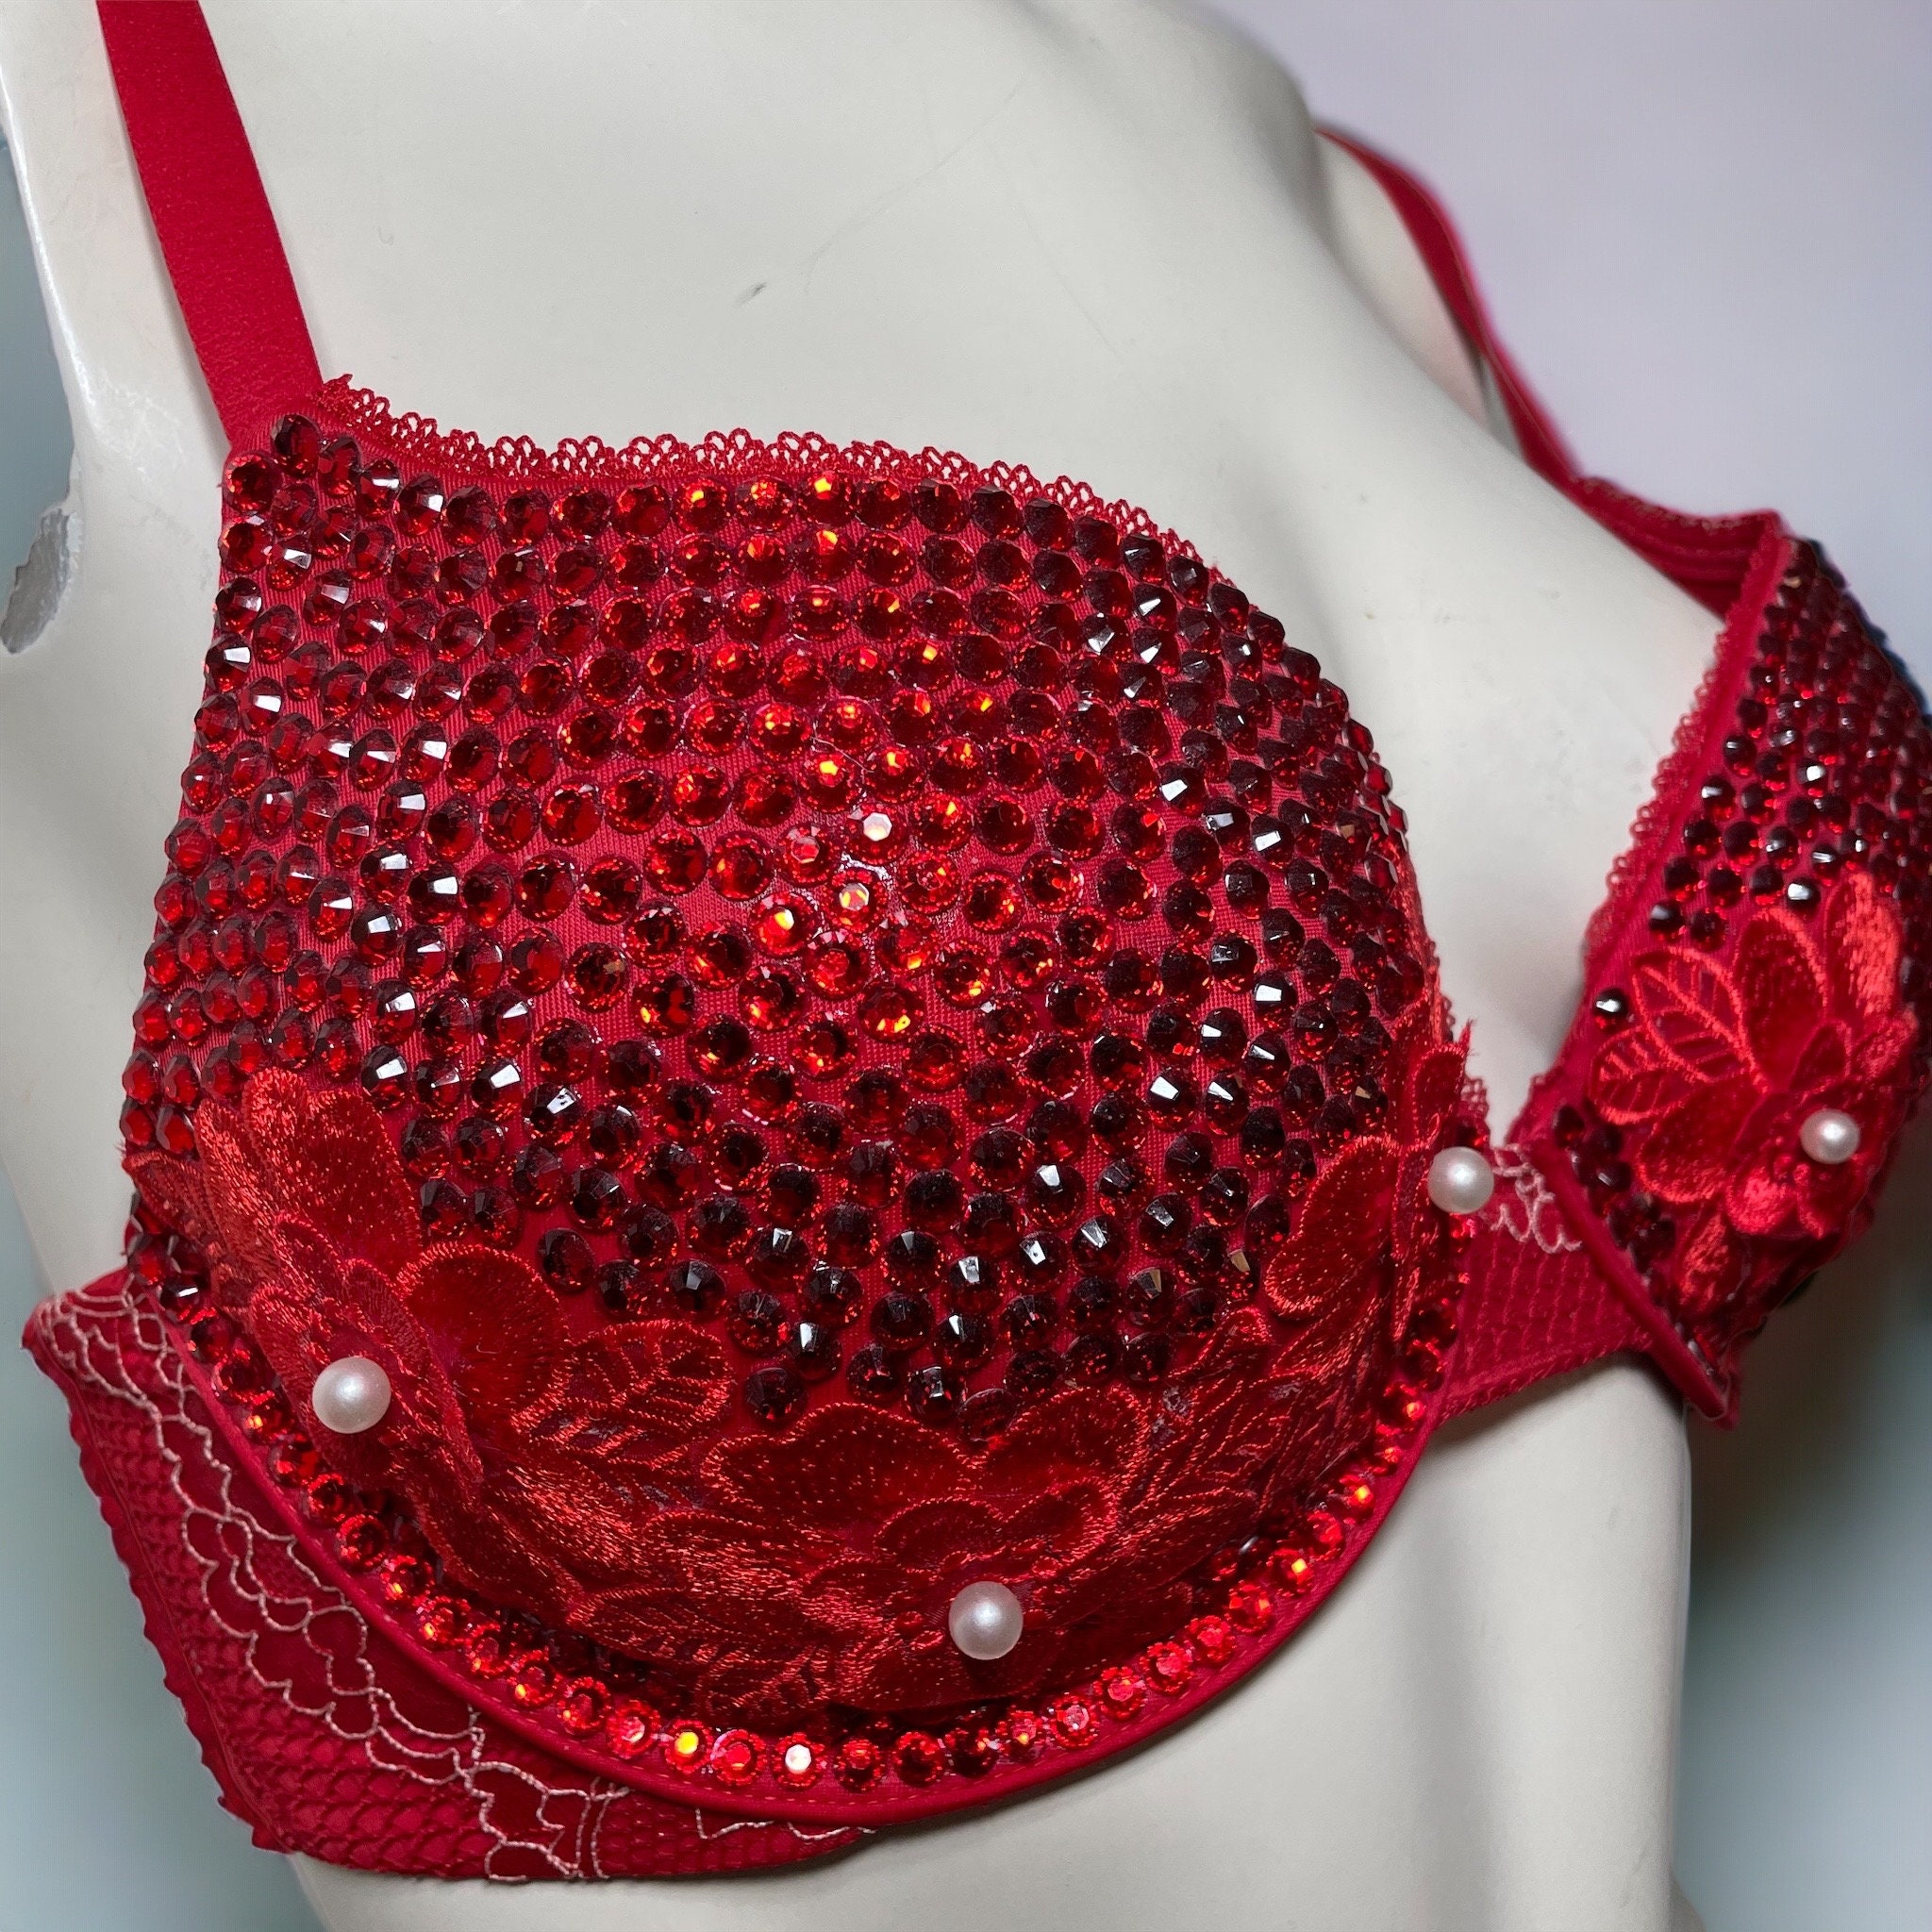 Red Floral Appliqué and Rhinestone Embellished Burlesque Bra Top Size 34D  top Only 